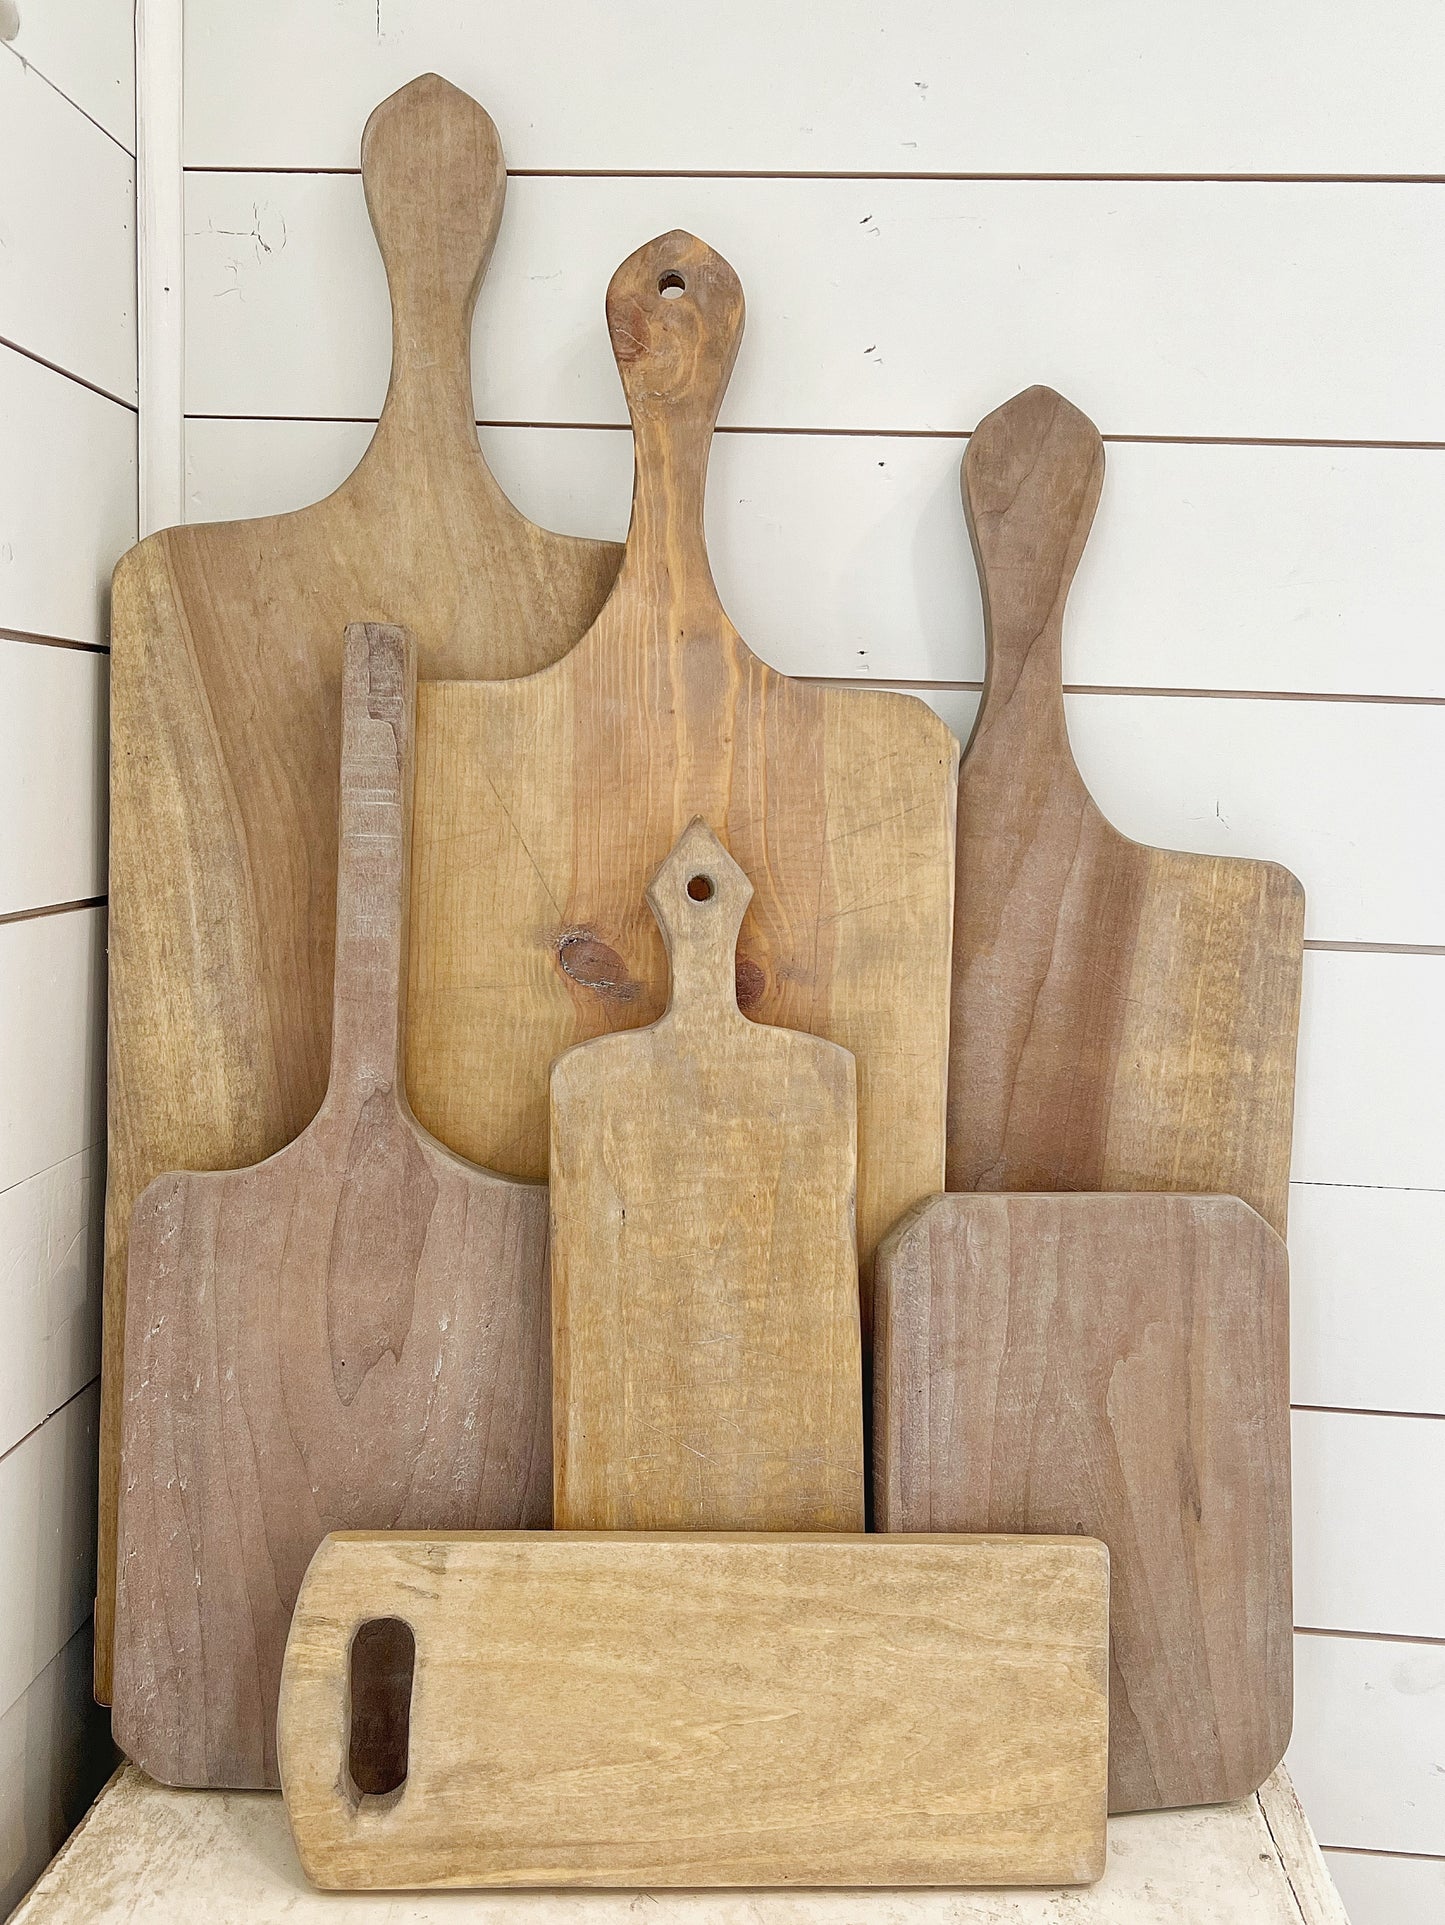 English Inspired Antique Cutting Boards